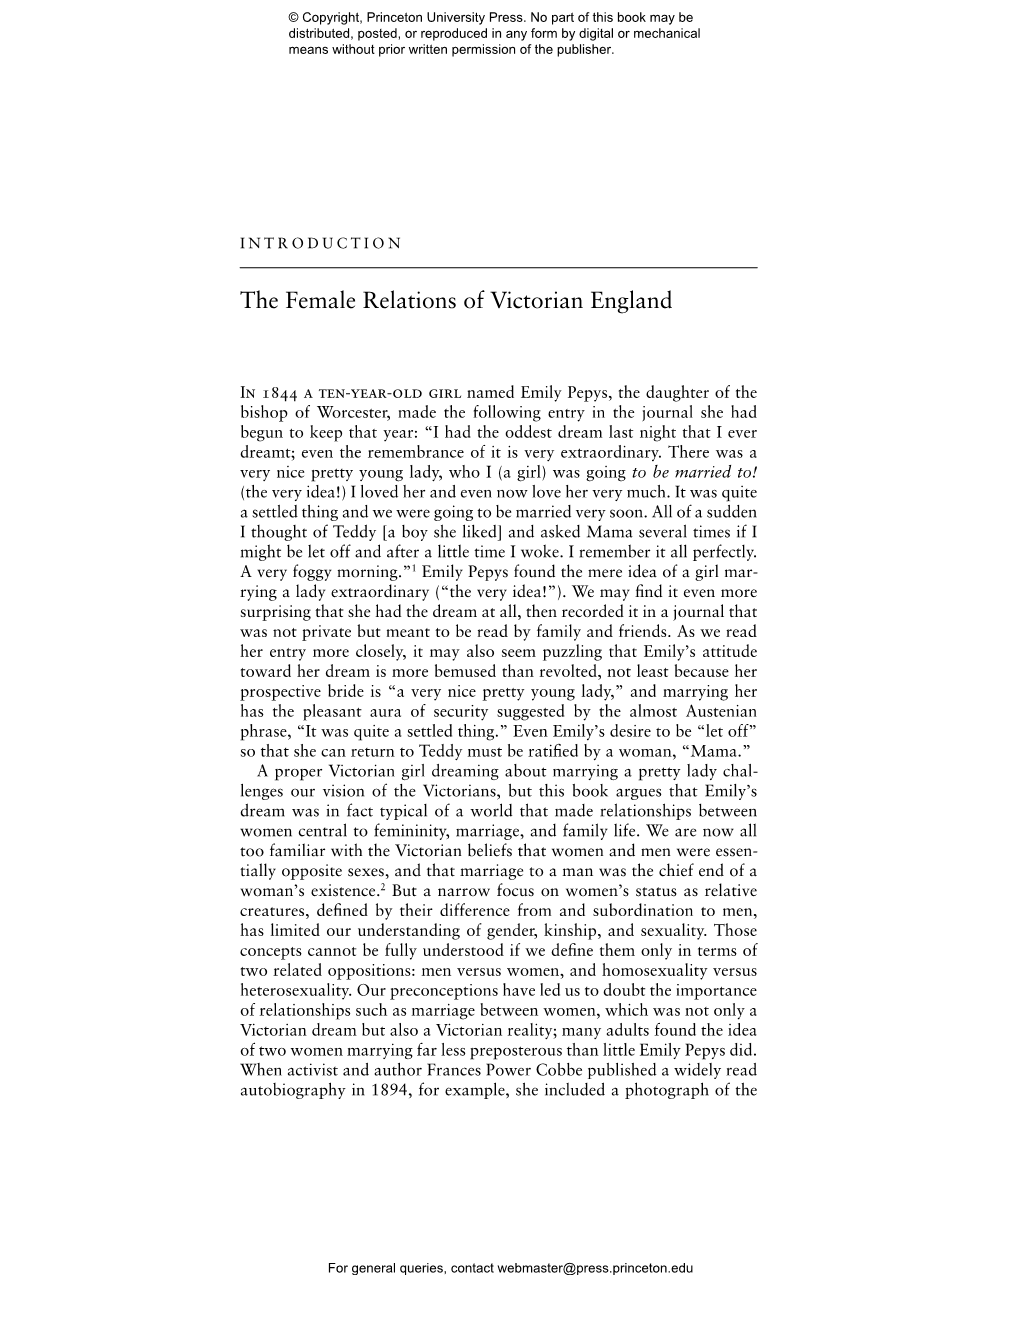 The Female Relations of Victorian England